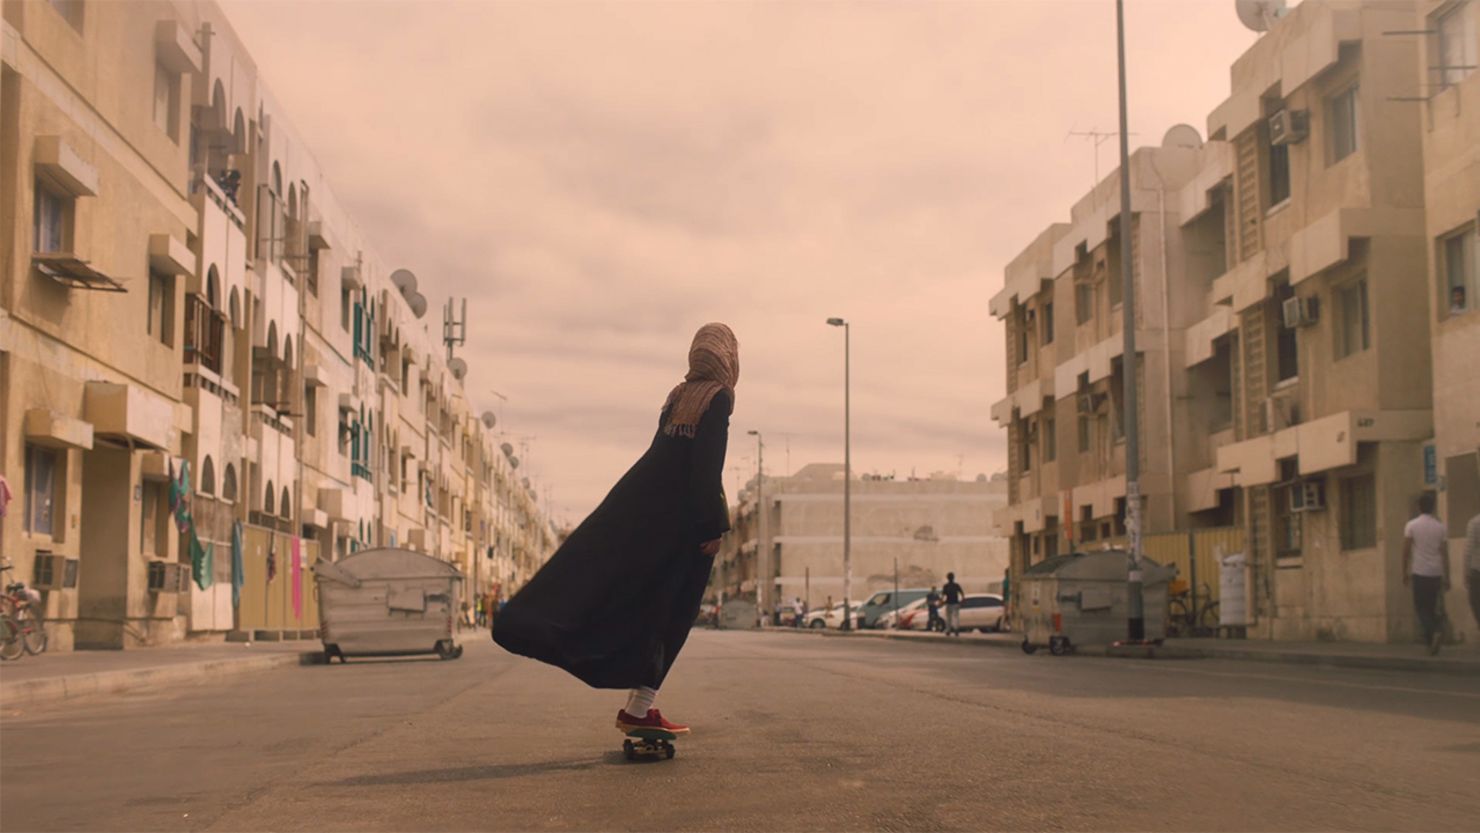 A Nike commercial features five prominent female athletes from the Arab world.